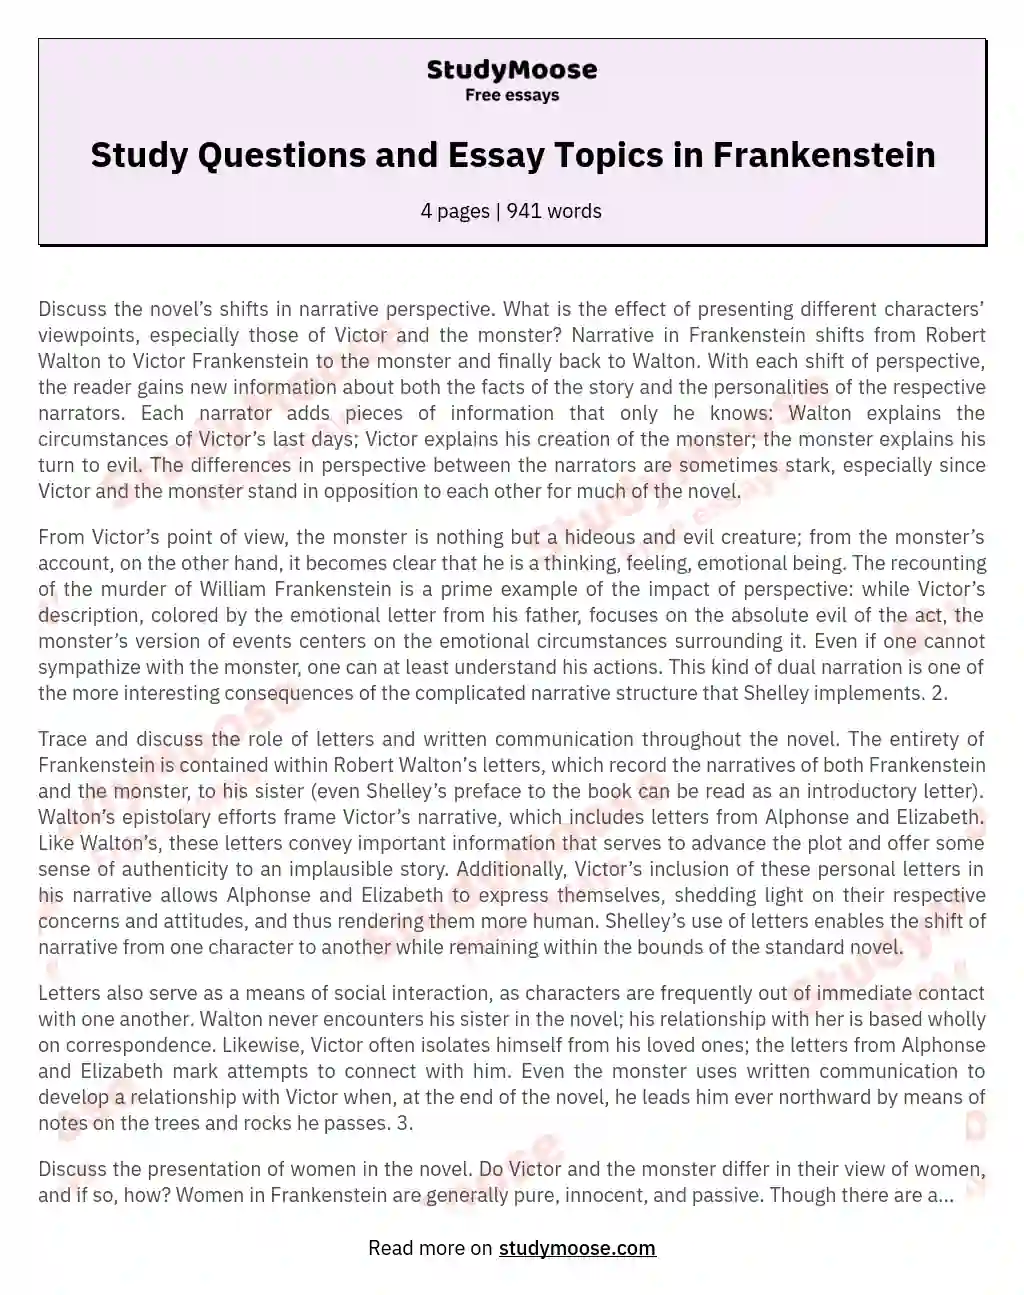 Study Questions and Essay Topics in Frankenstein